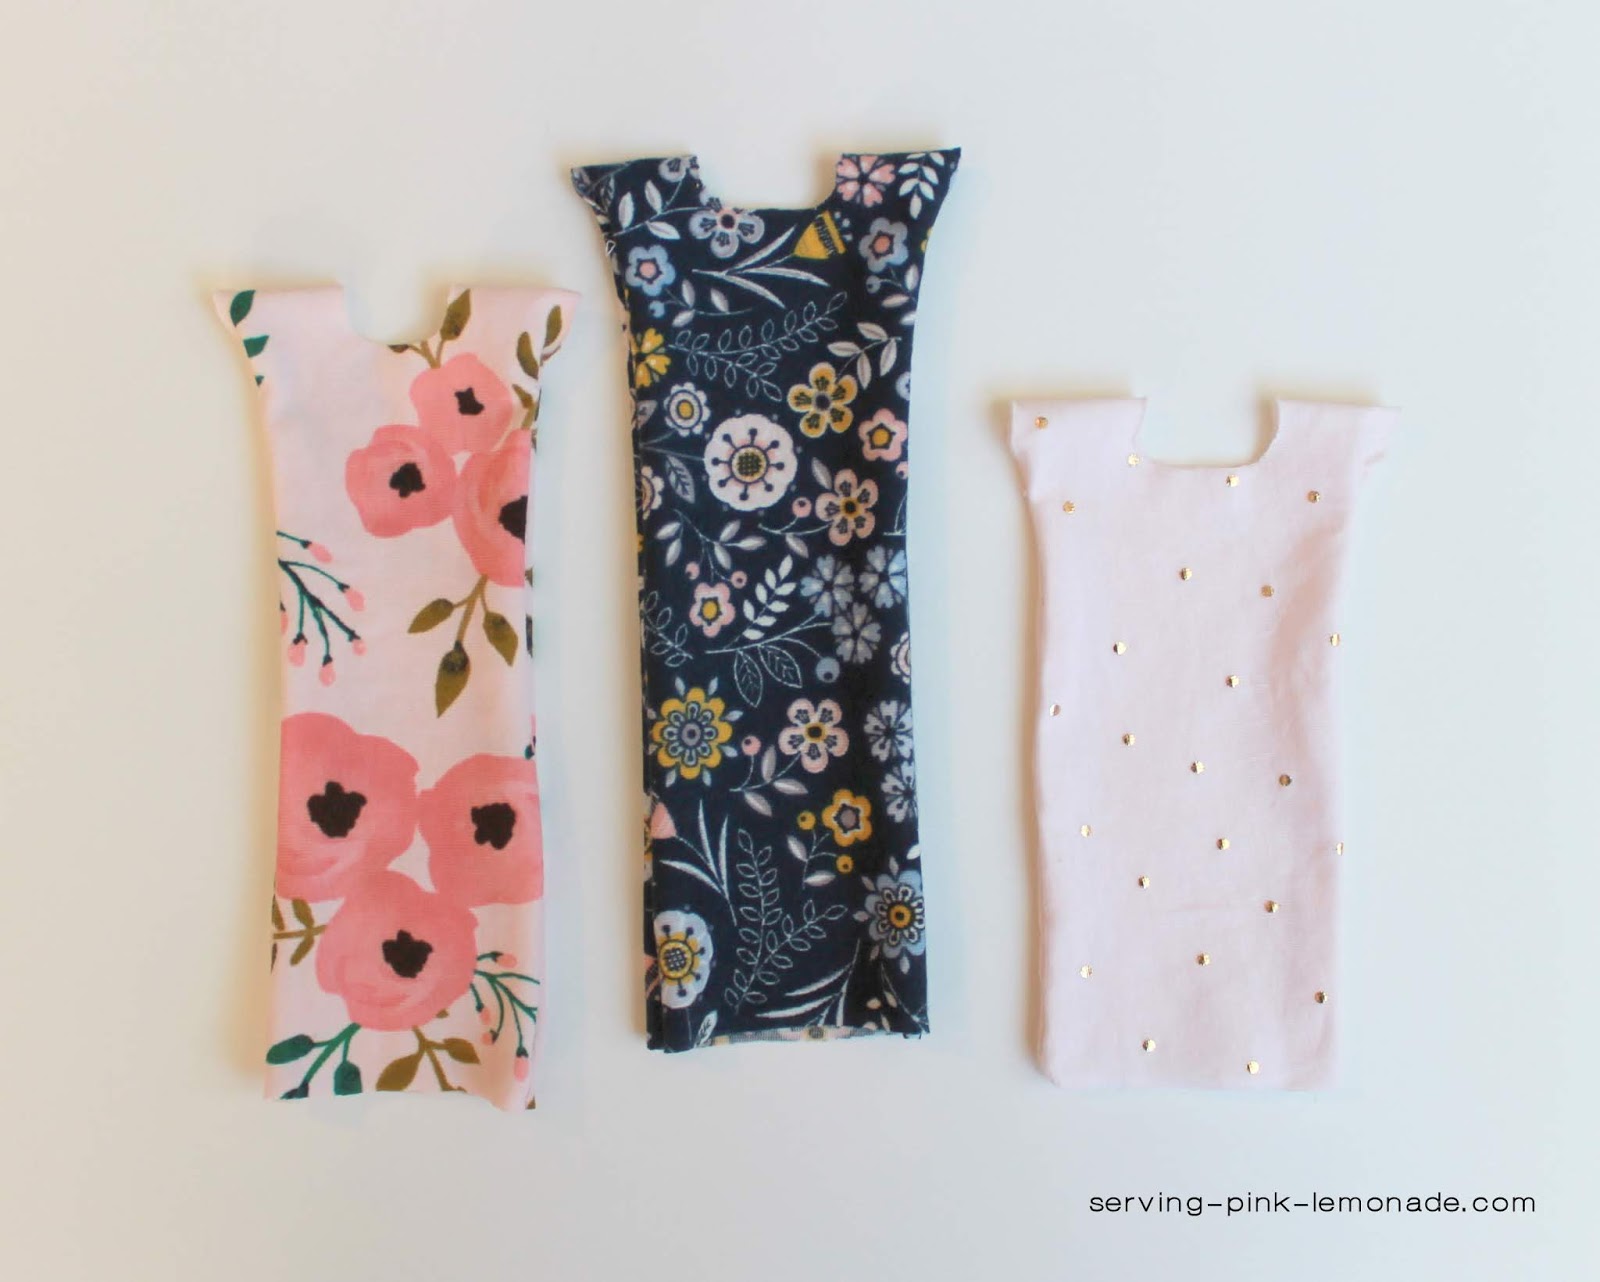 How to Draft Patterns for DIY Barbie Clothes - The Shapes of Fabric